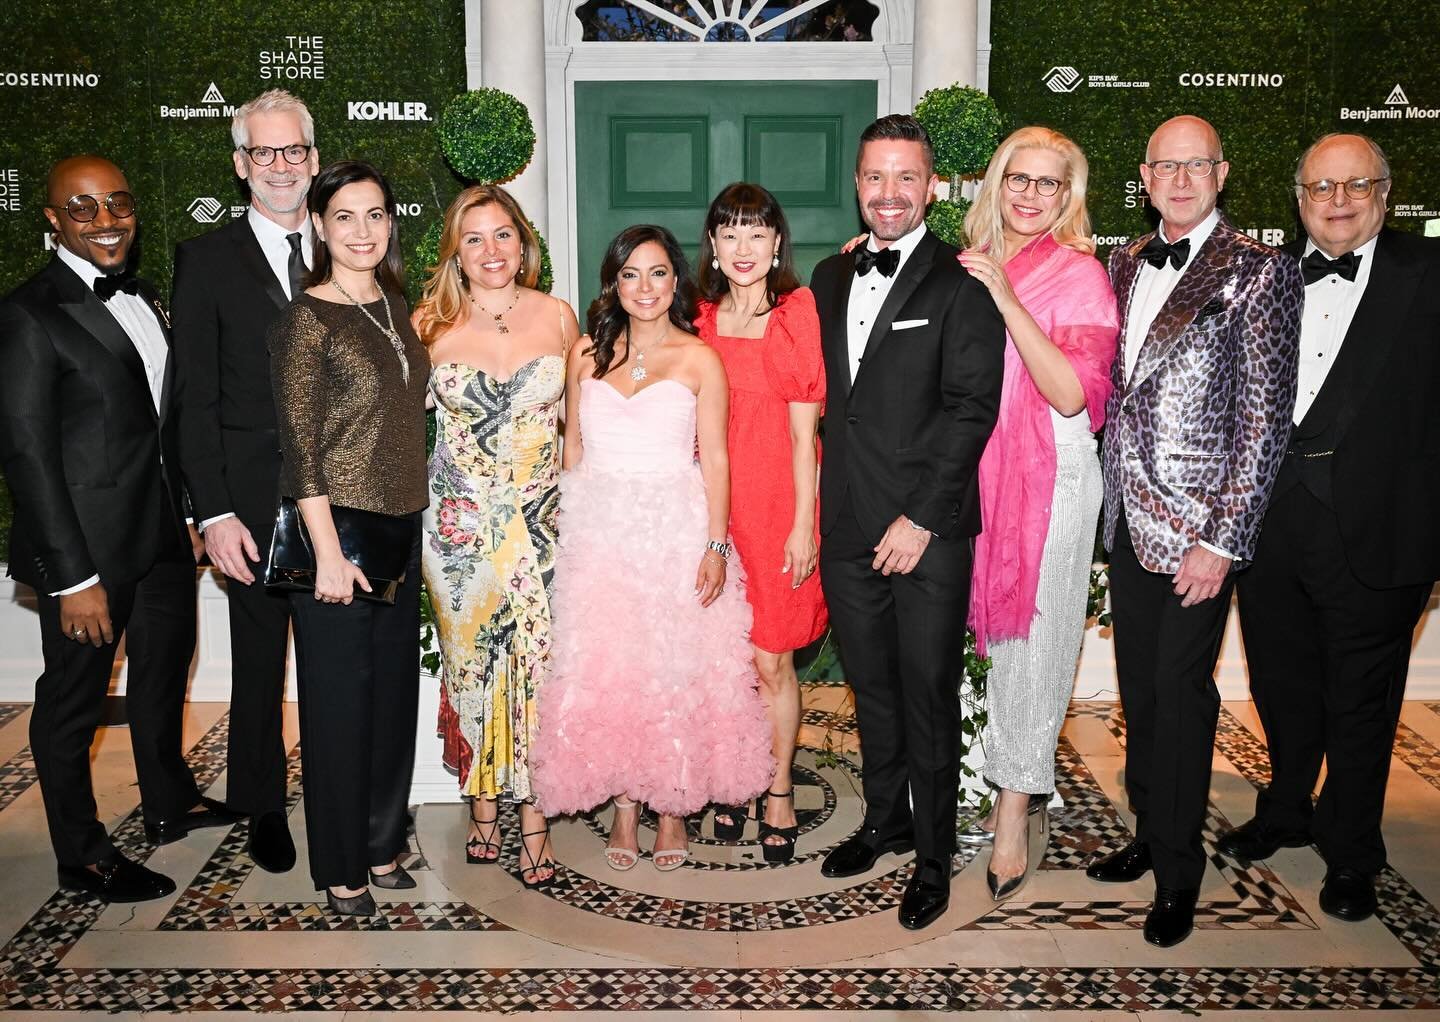 Proud to have once again served as Vice-Chair of the Kips Bay President&rsquo;s Dinner, the most important and impactful evening in Interior Design each year.  The dinner raises funds for the @kipsbaybgc and celebrates each season&rsquo;s @kbshowhous